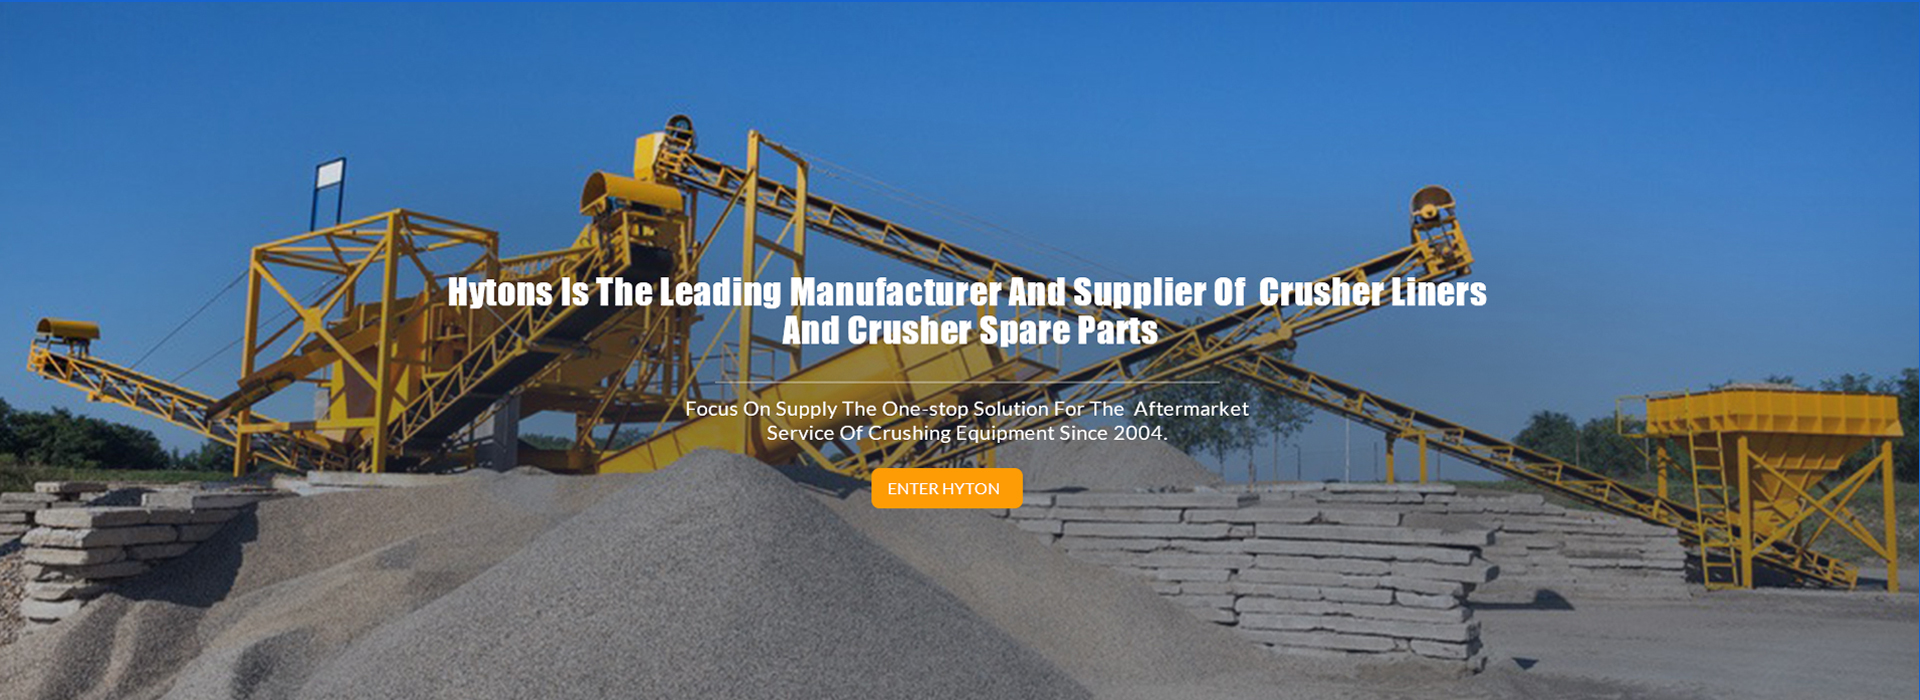 Application of impact crusher parts